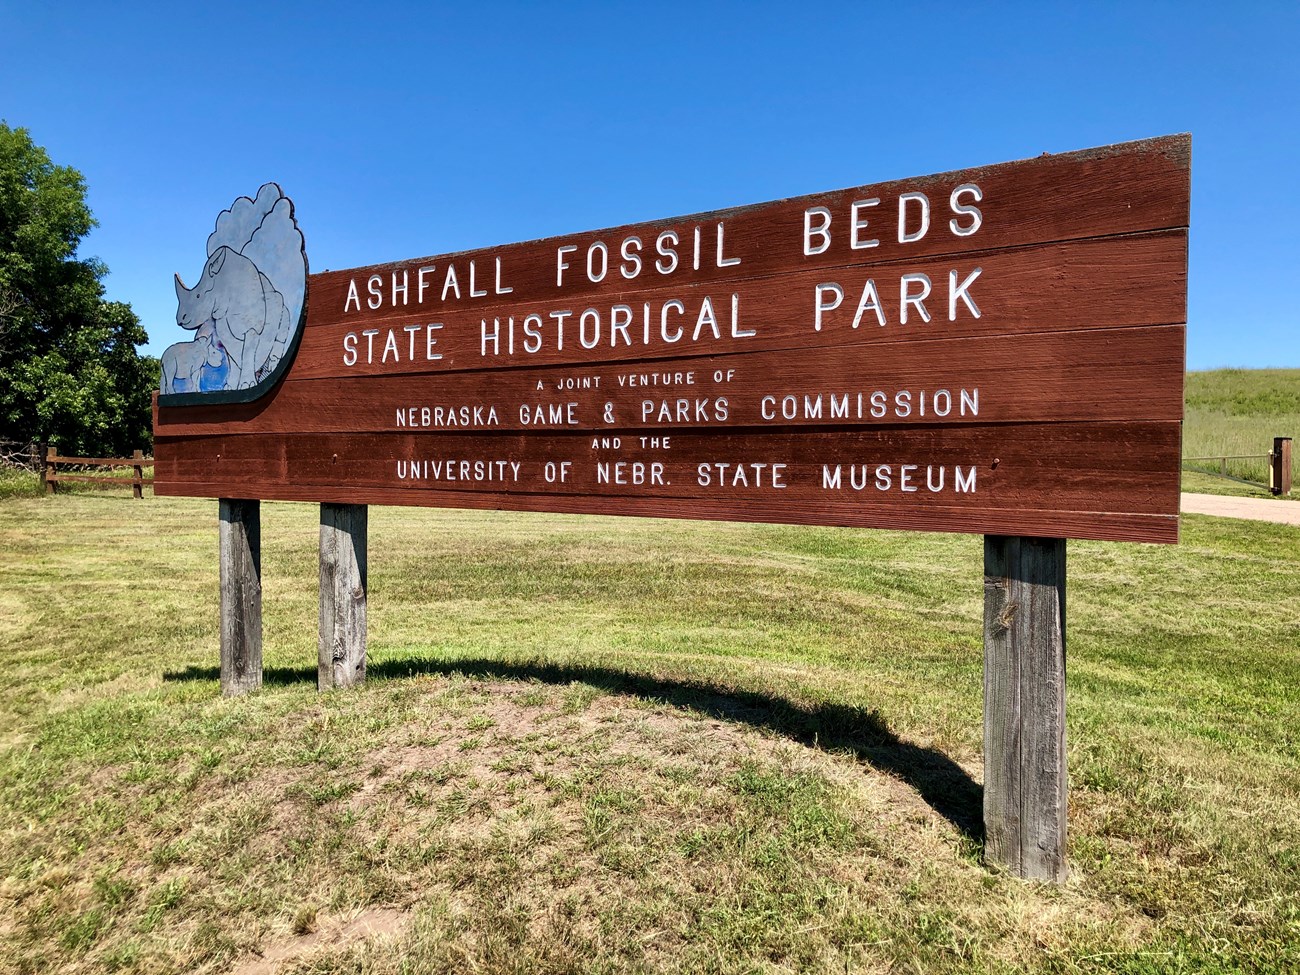 photo of Ashfall Fossil Beds entrance sign